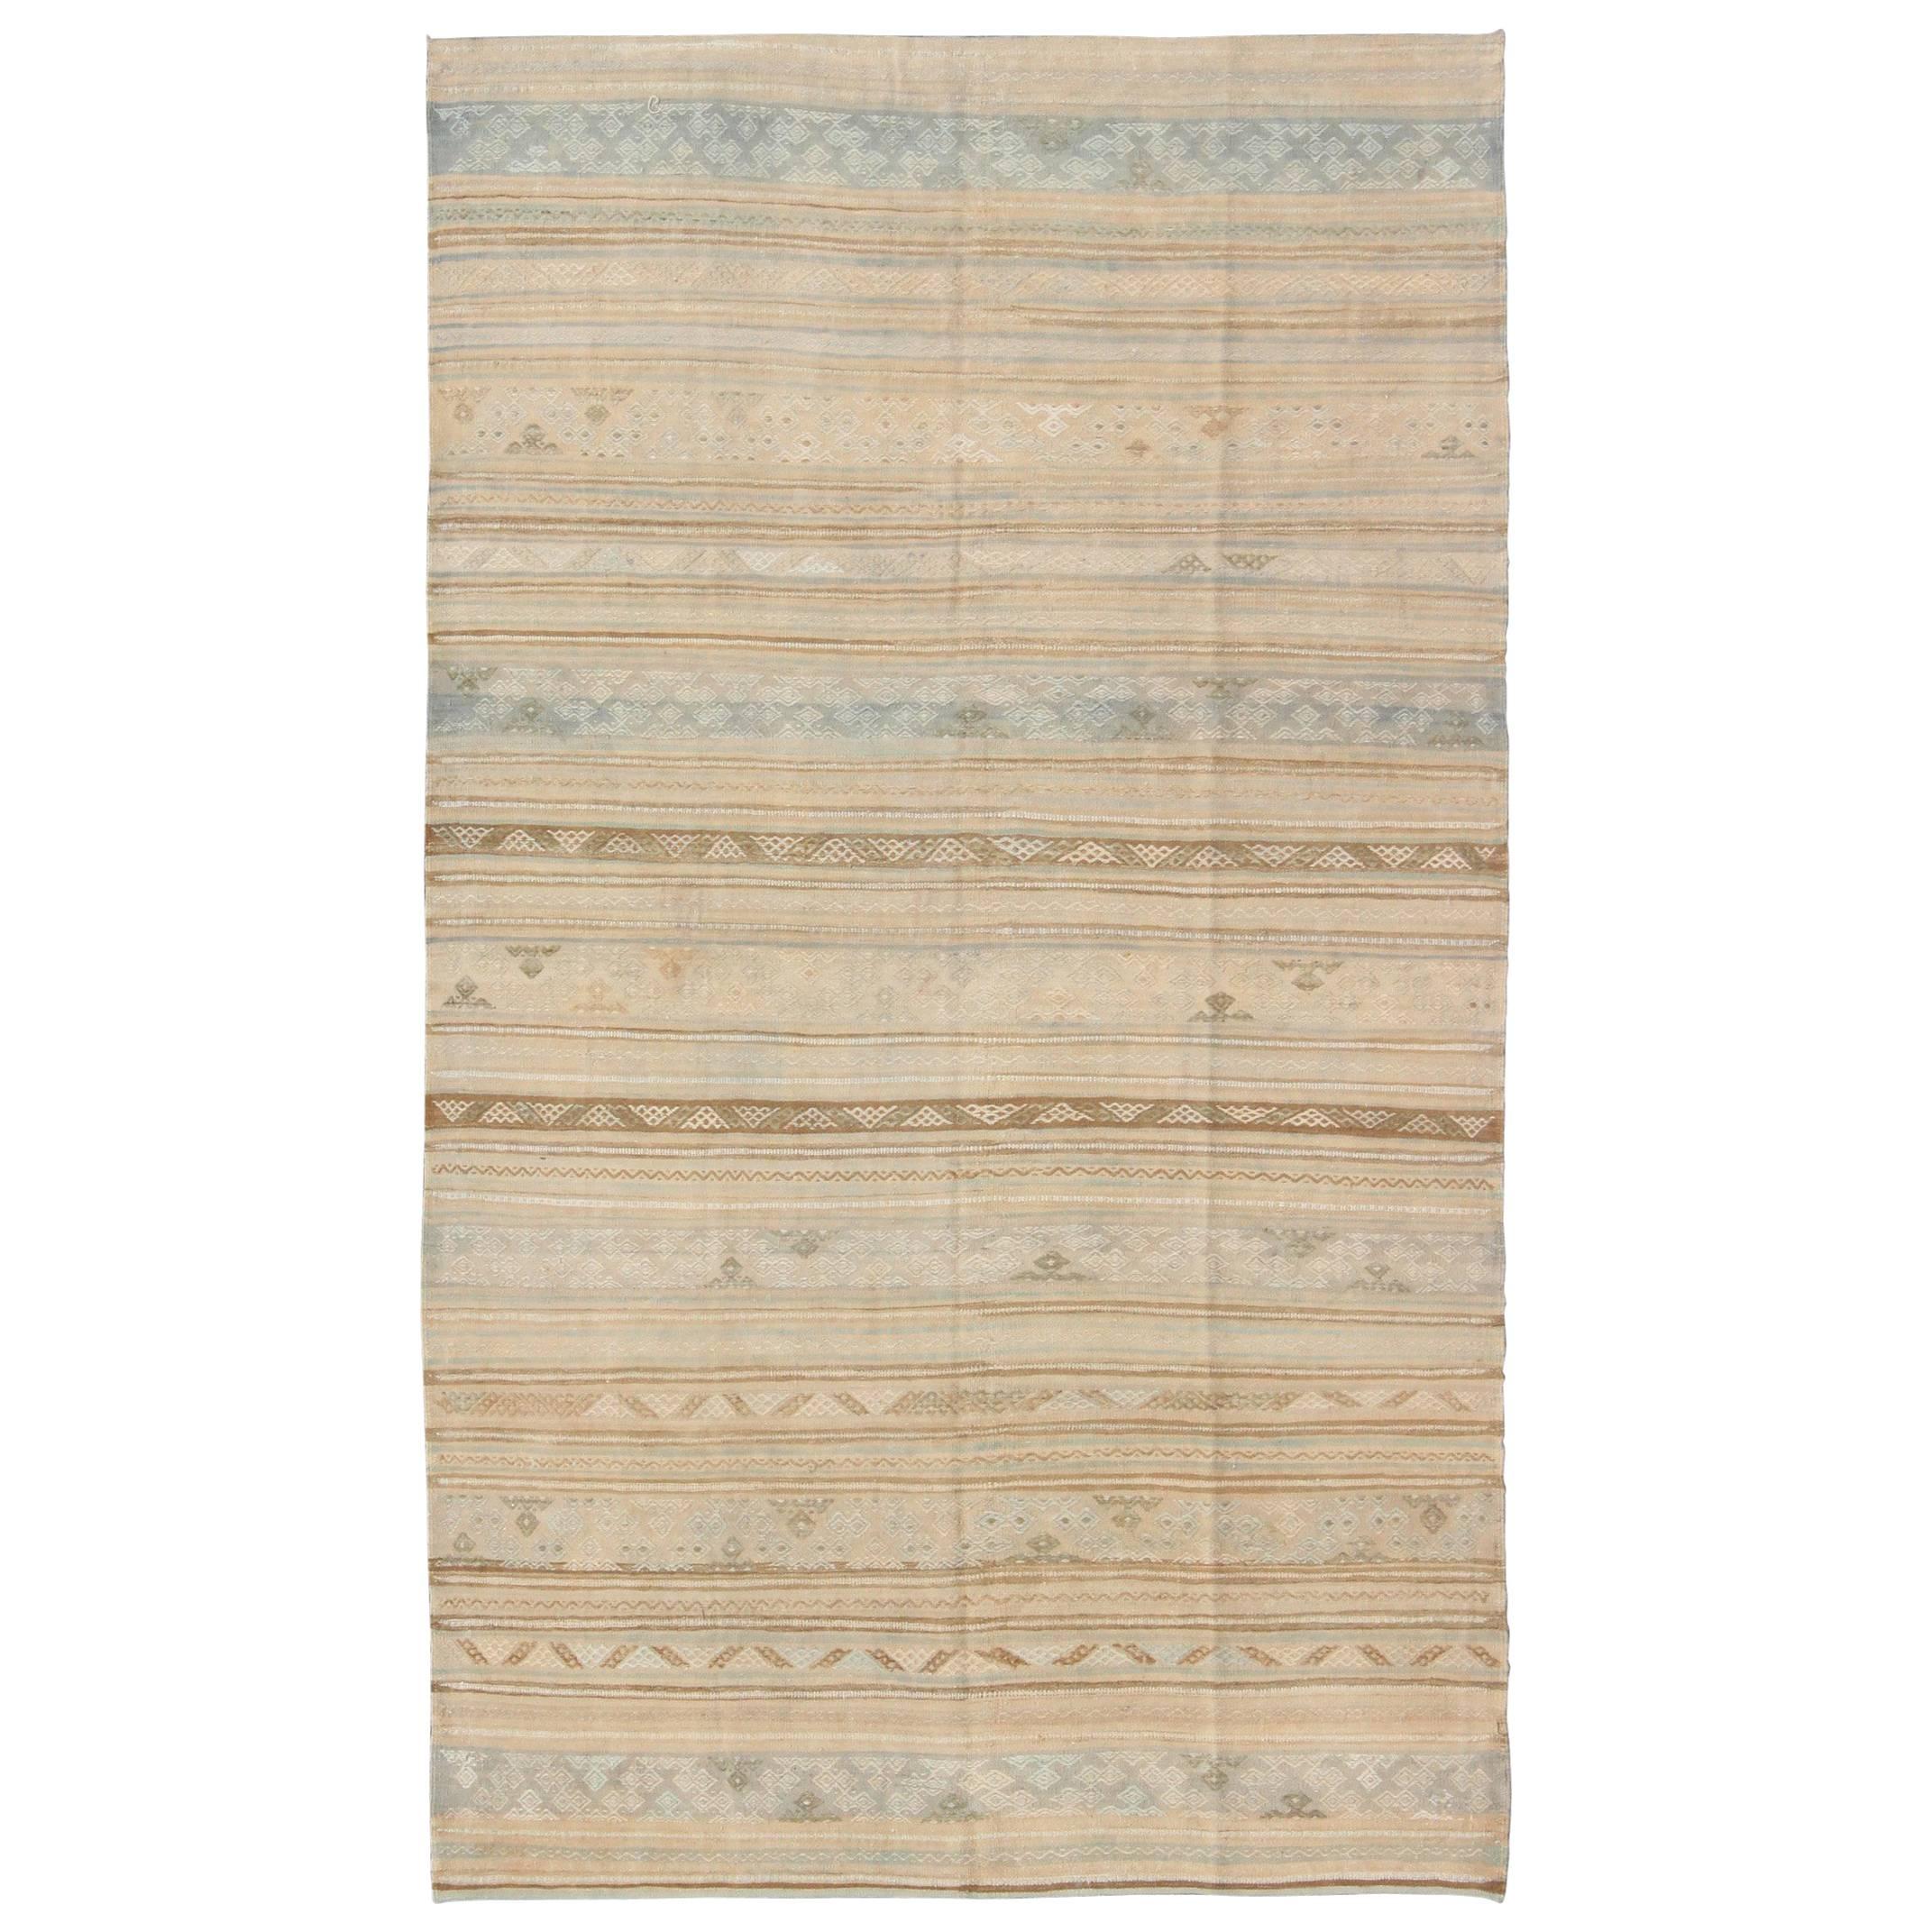 Neutral Stripes Vintage Turkish Kilim Rug with Assorted Geometric Tribal Shapes For Sale